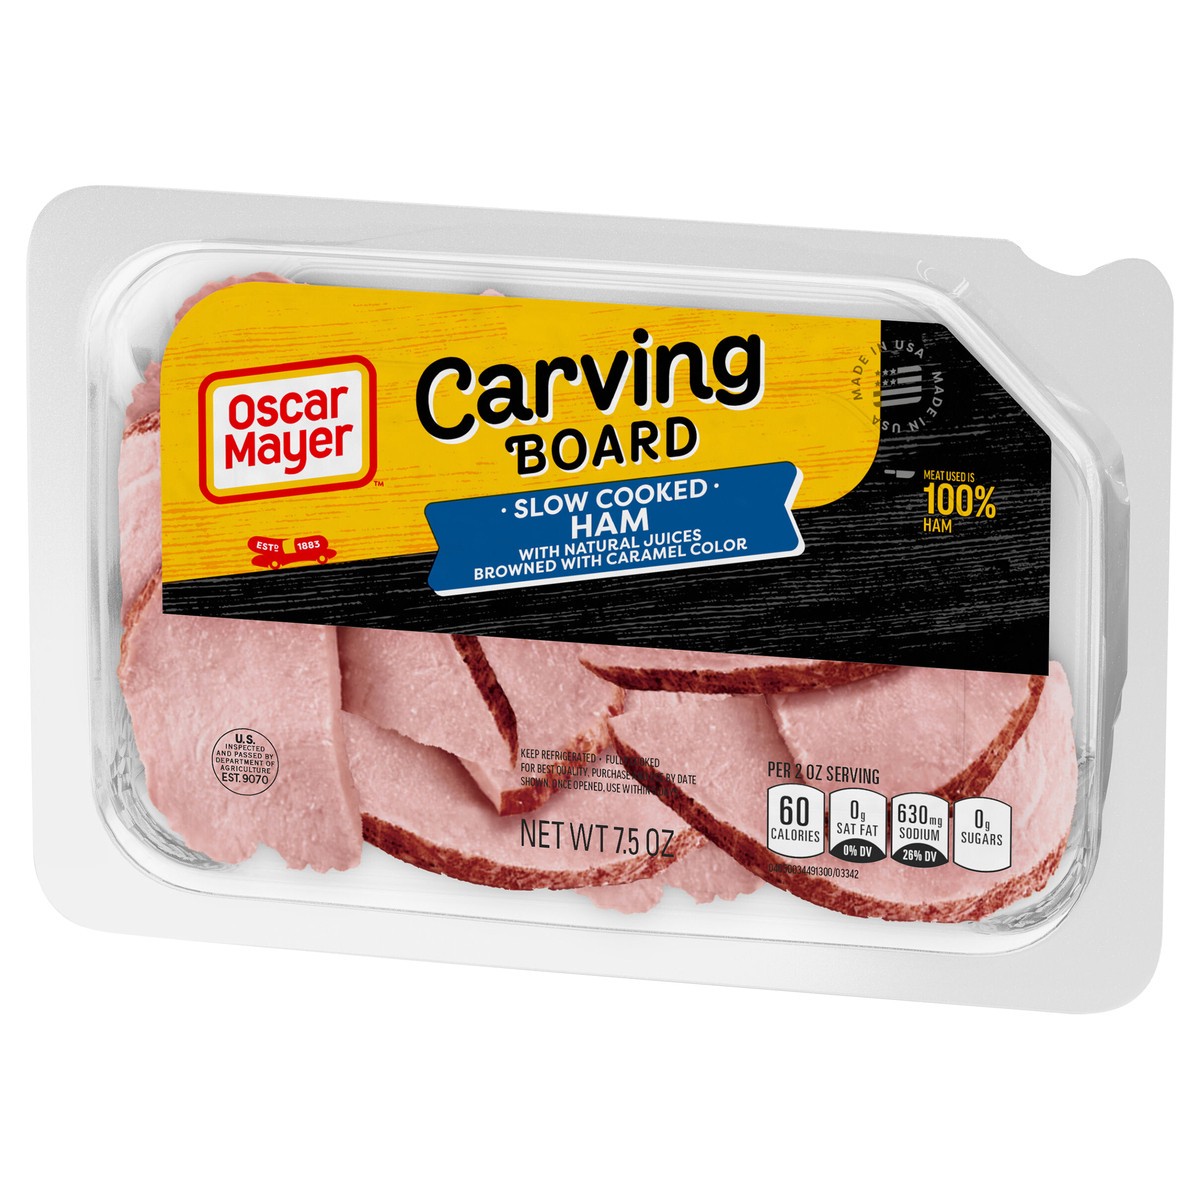 slide 4 of 9, Oscar Mayer Carving Board Slow Cooked Ham Sliced Lunch Meat, 7.5 oz. Tray, 7.5 oz